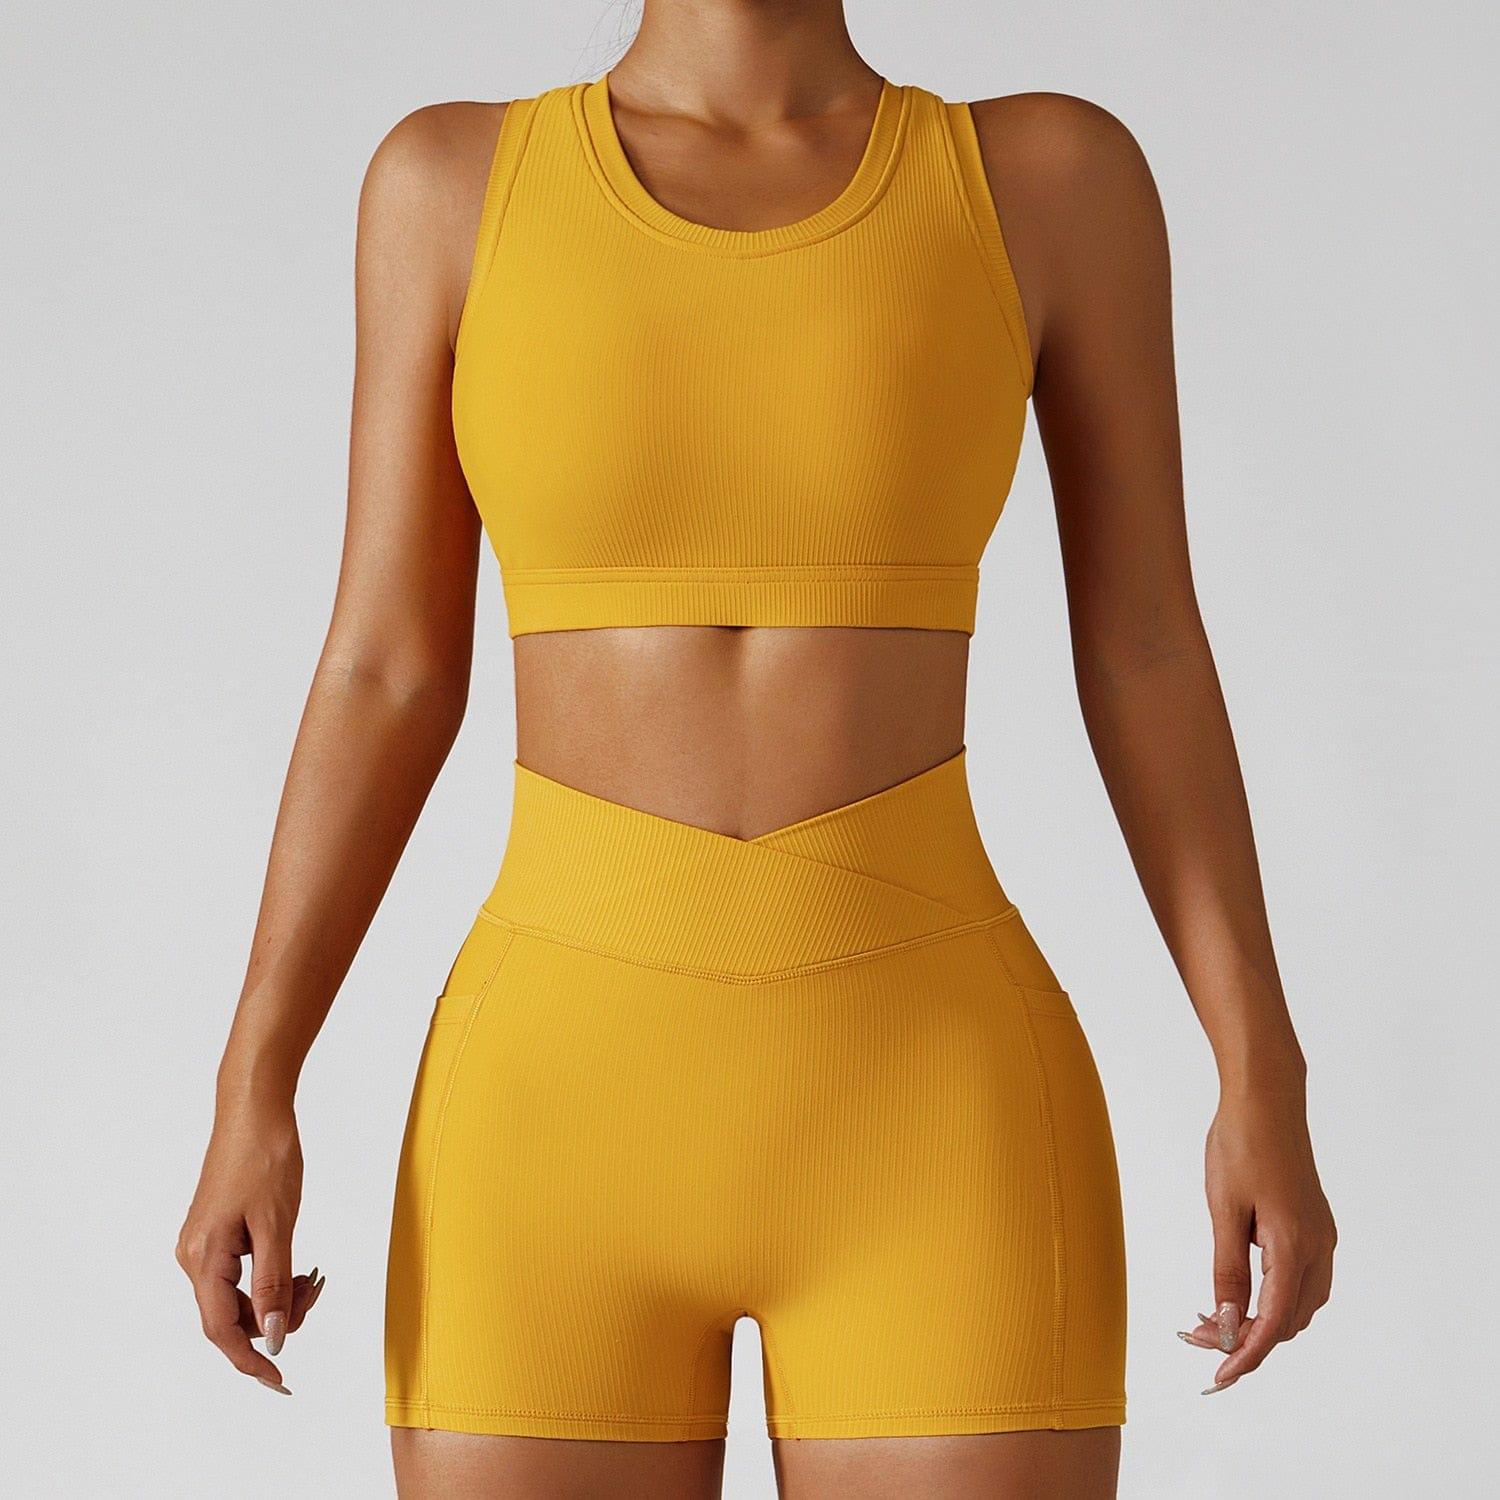 Shop 0 Yellow suit-2 / S / China 2 Pieces Seamless Women Tracksuit  Yoga Set Running Workout Sportswear Gym Clothes Fitness Bra High Waist Leggings Sports Suit Mademoiselle Home Decor